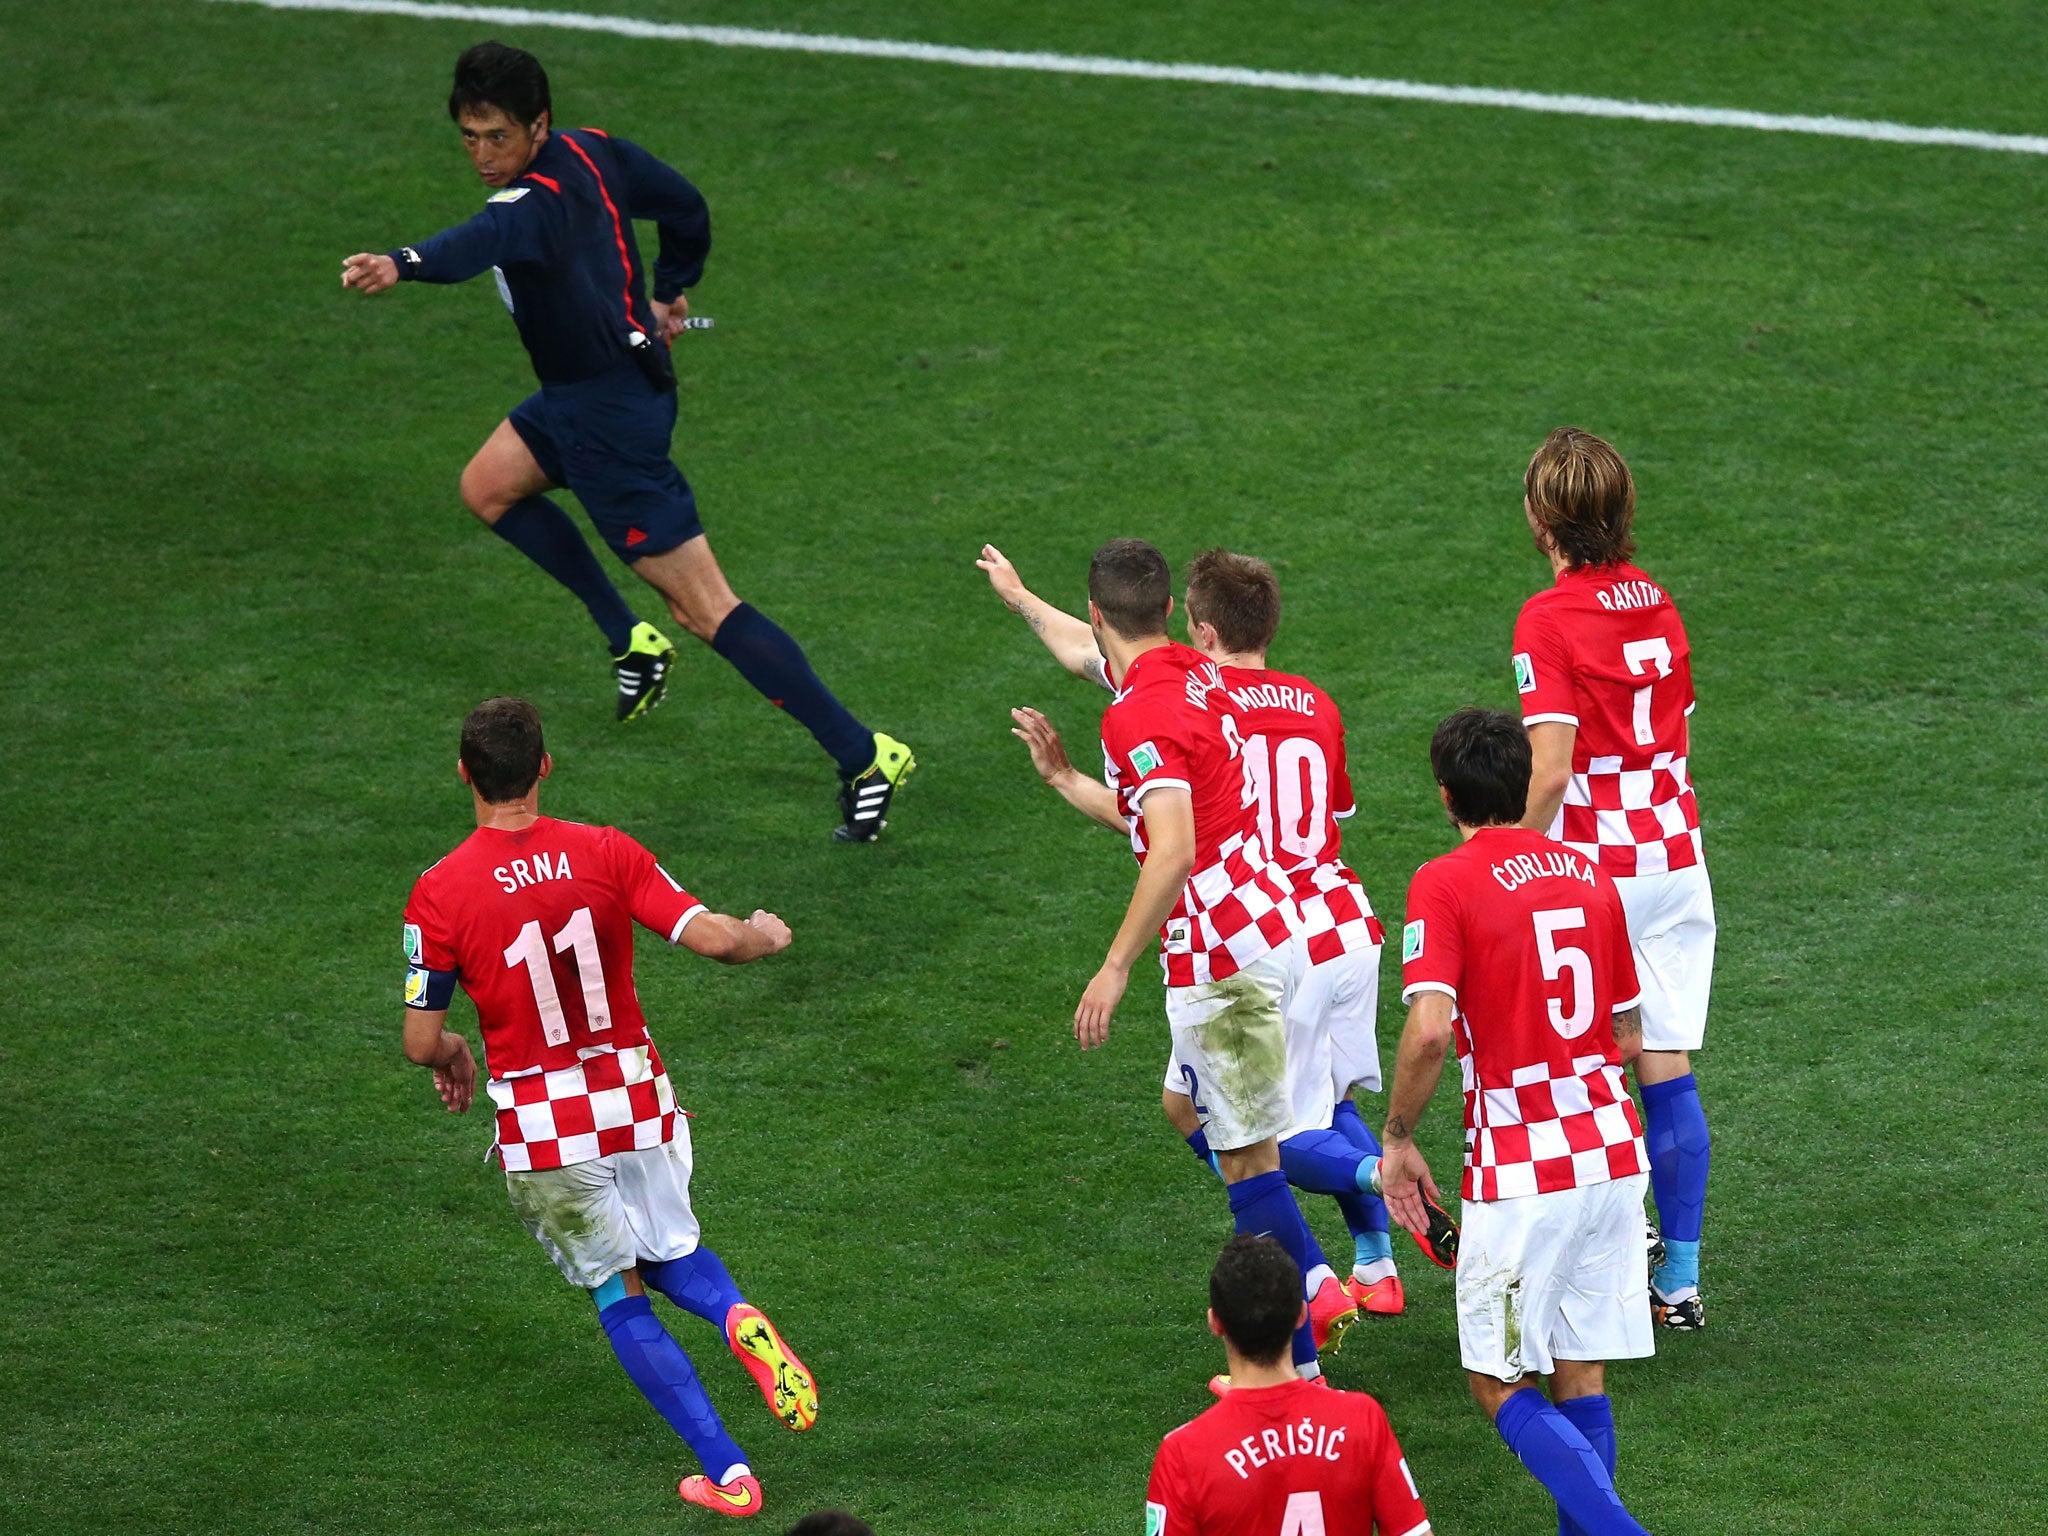 Croatian players chase Yuichi Nushima after he awards the penalty